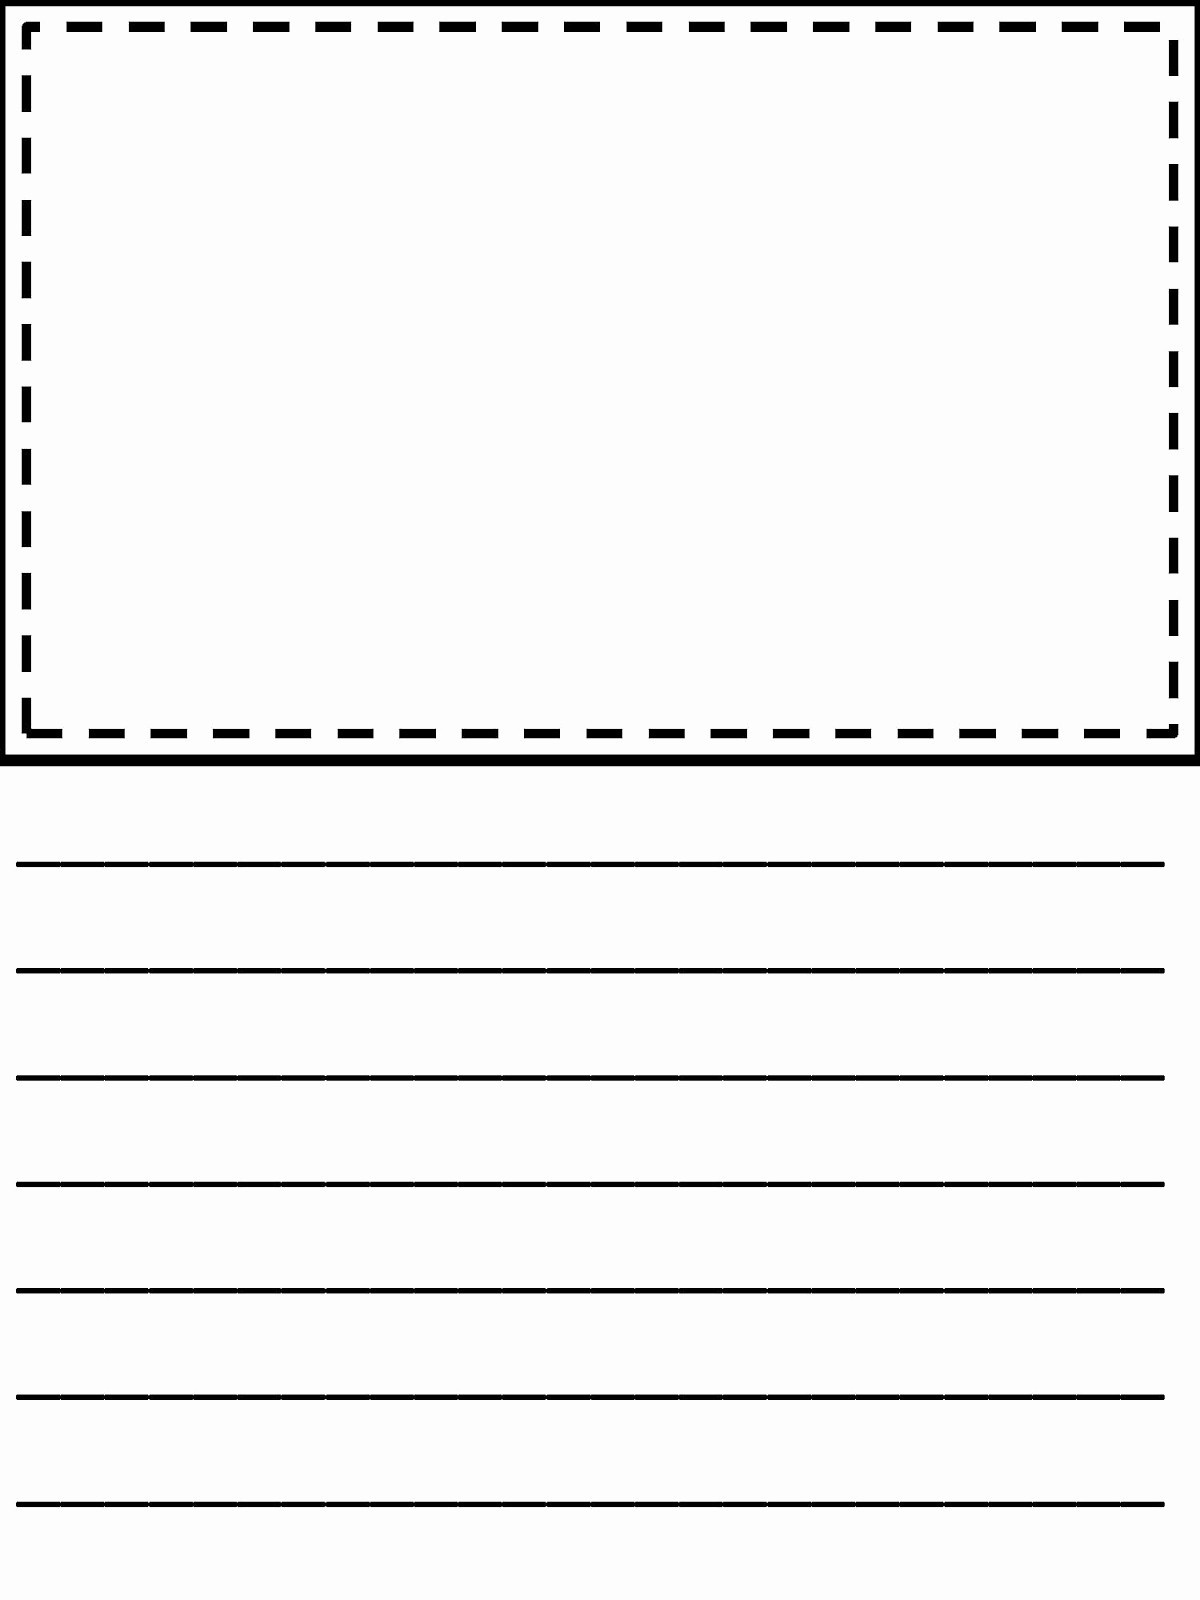 Writing Paper For First Grade With Picture Box - Floss Papers - Free Printable Writing Paper With Picture Box